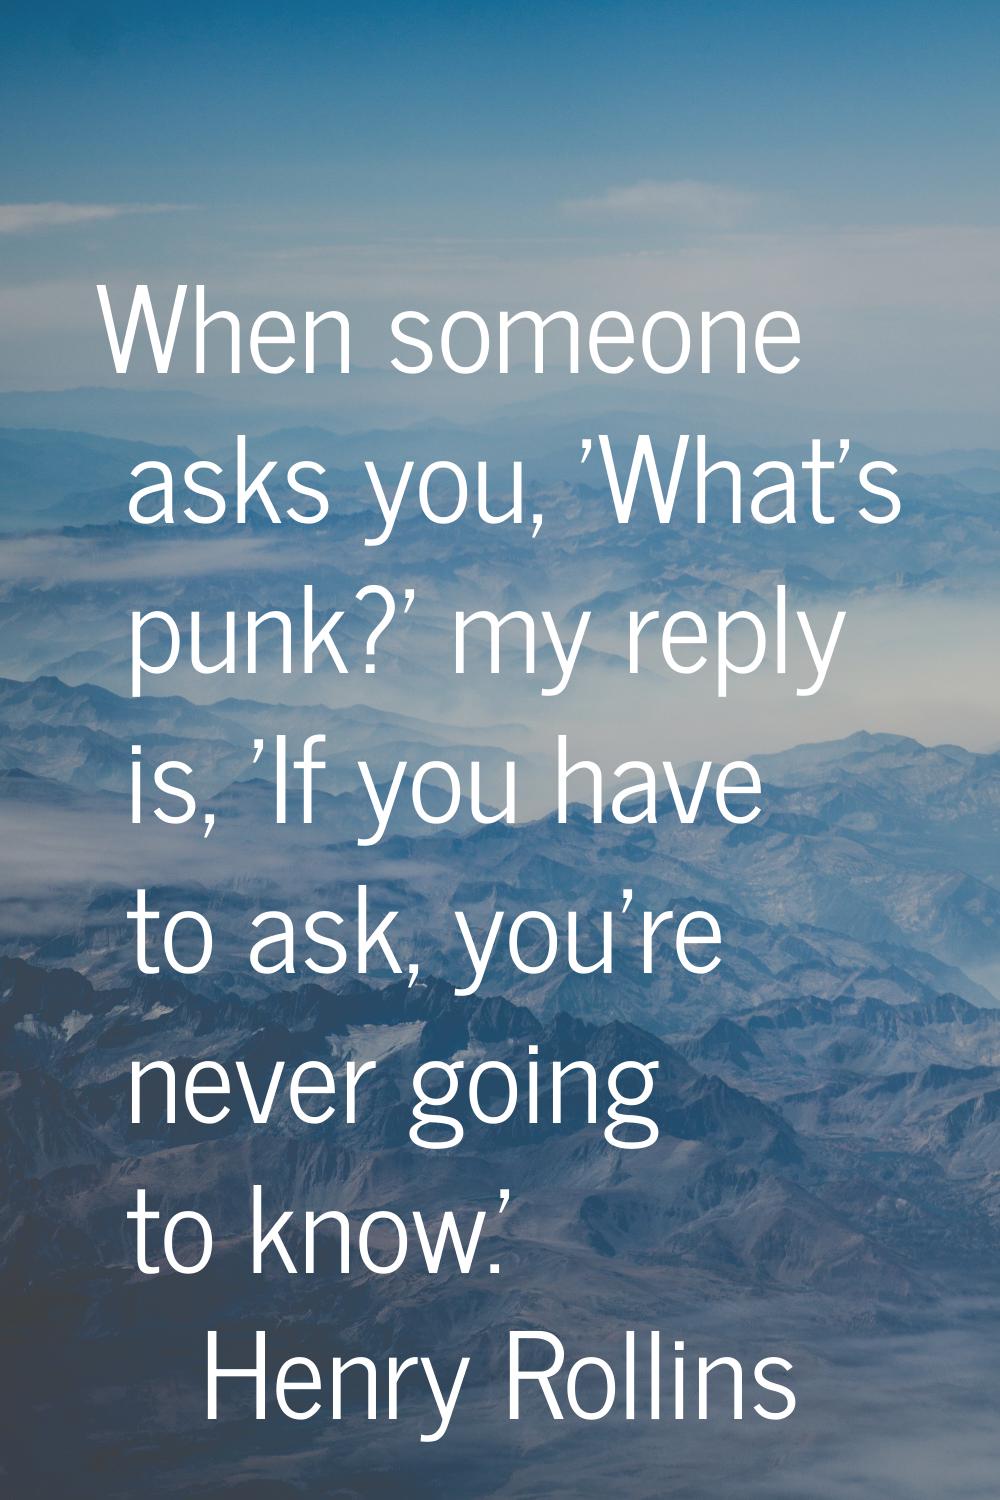 When someone asks you, 'What's punk?' my reply is, 'If you have to ask, you're never going to know.